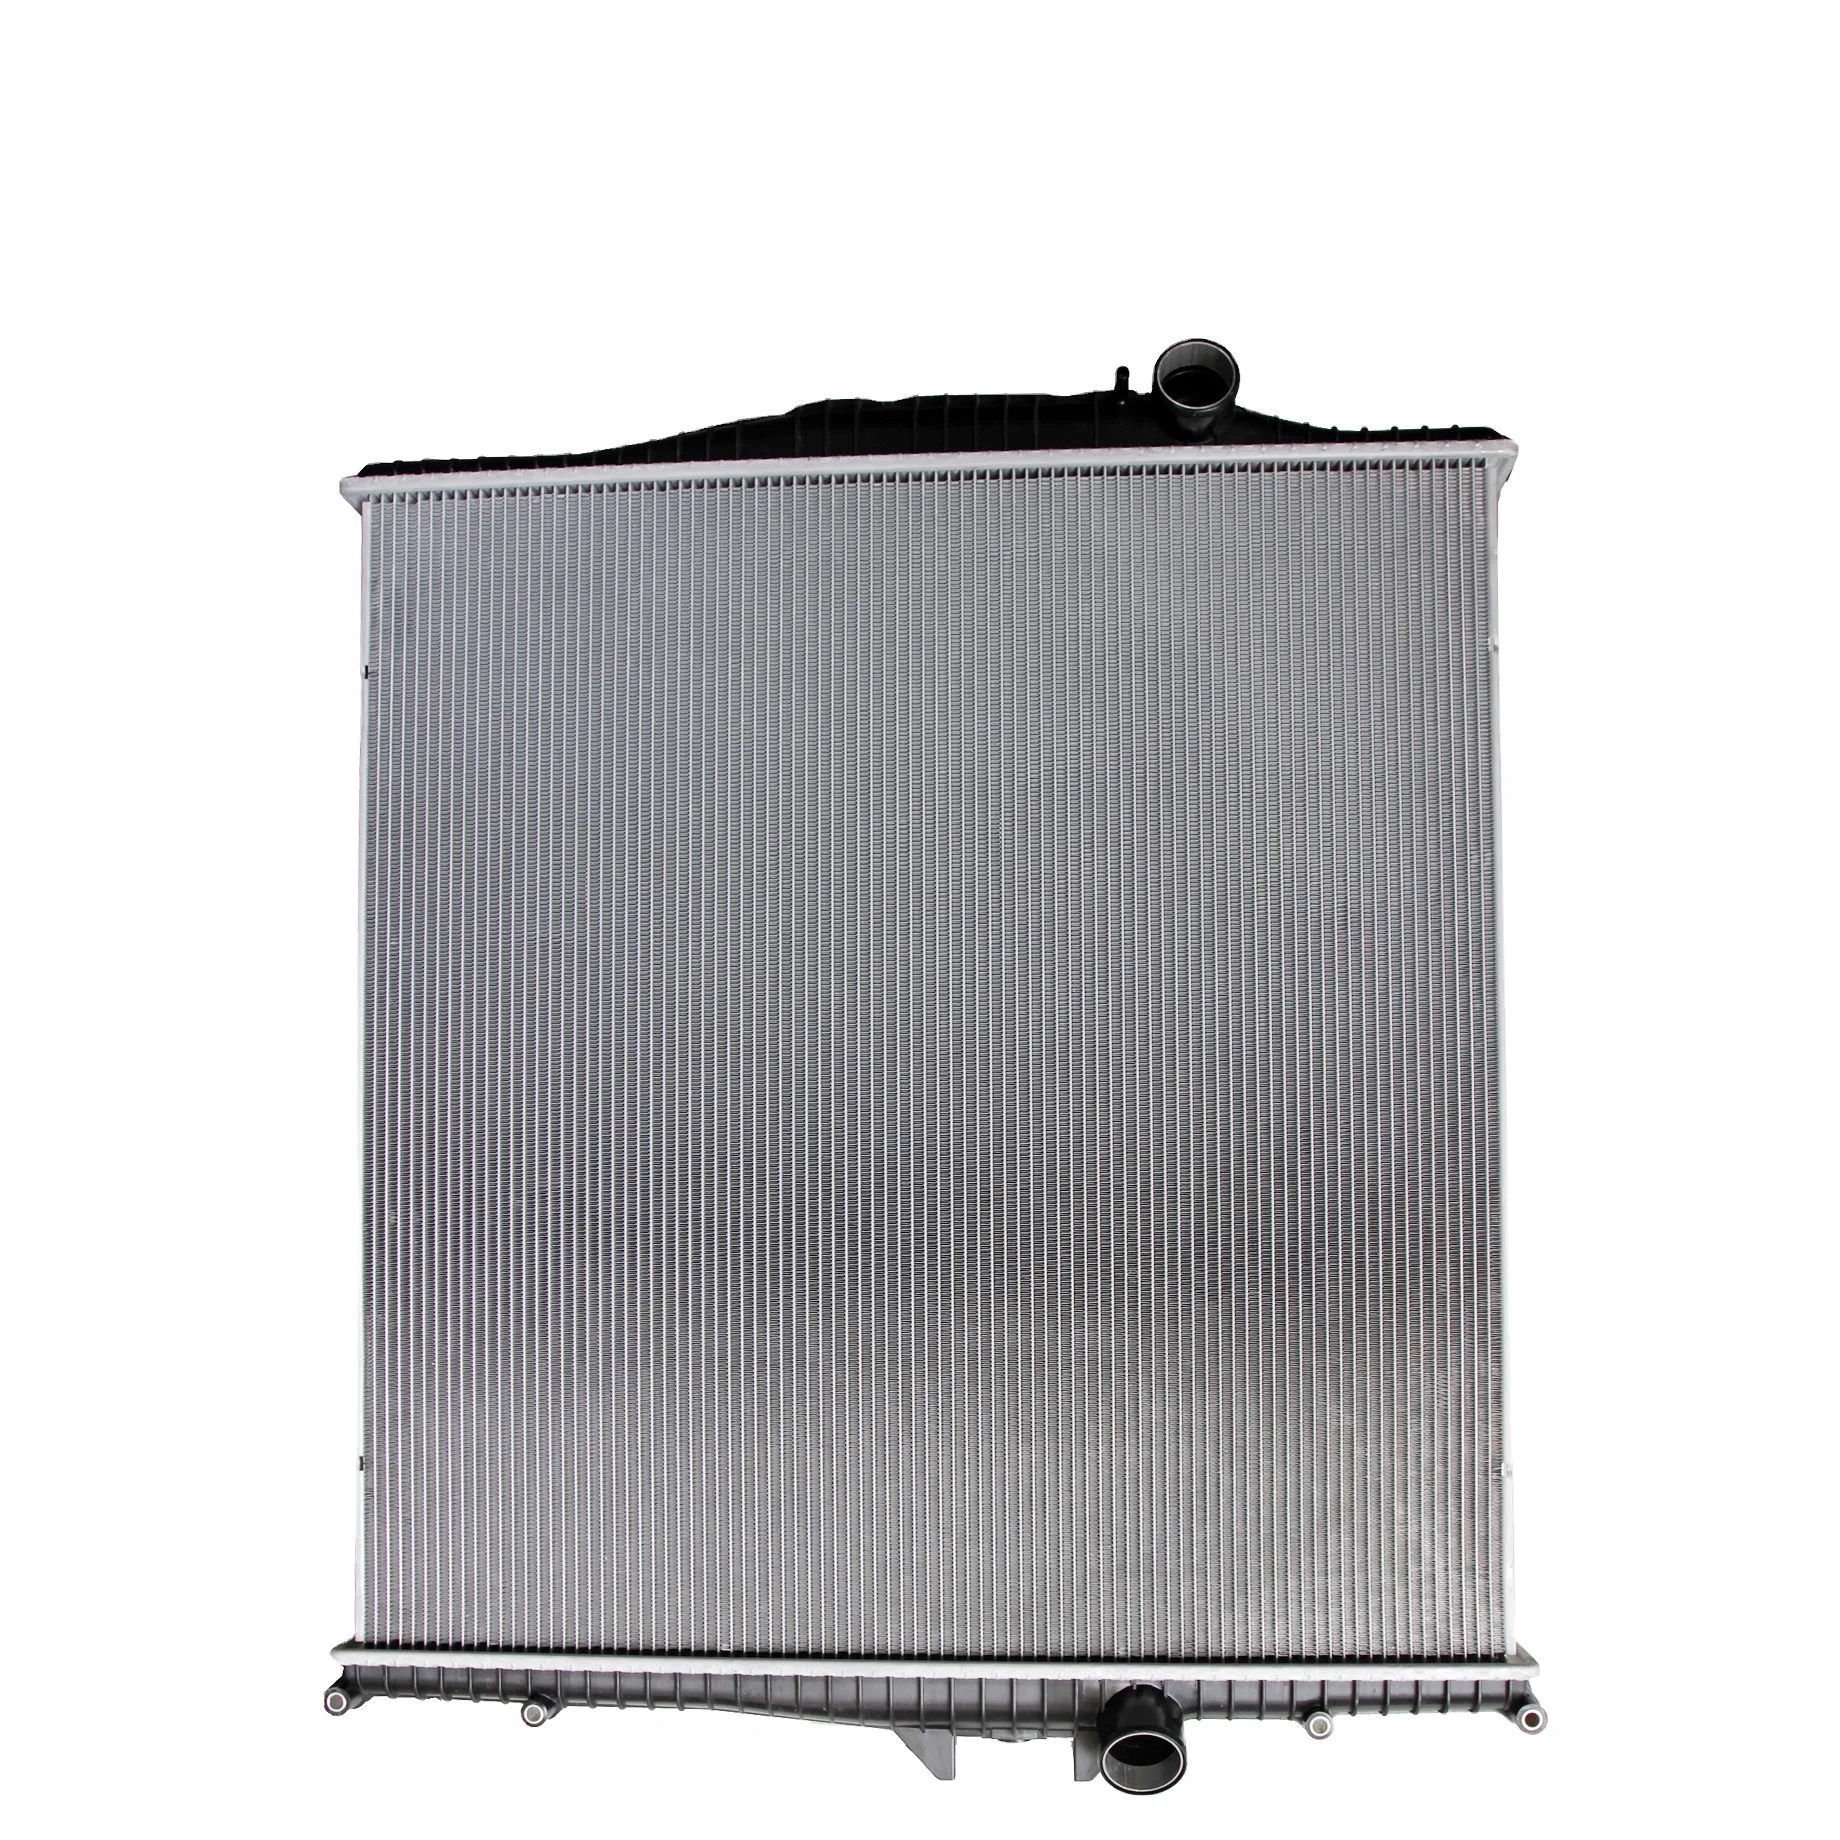 China manufacturing car auto radiator for TERBERG FH 89 0 OEM 8149362/8500325/20536948 factory radiation oem radiator for sale (1600126083385)